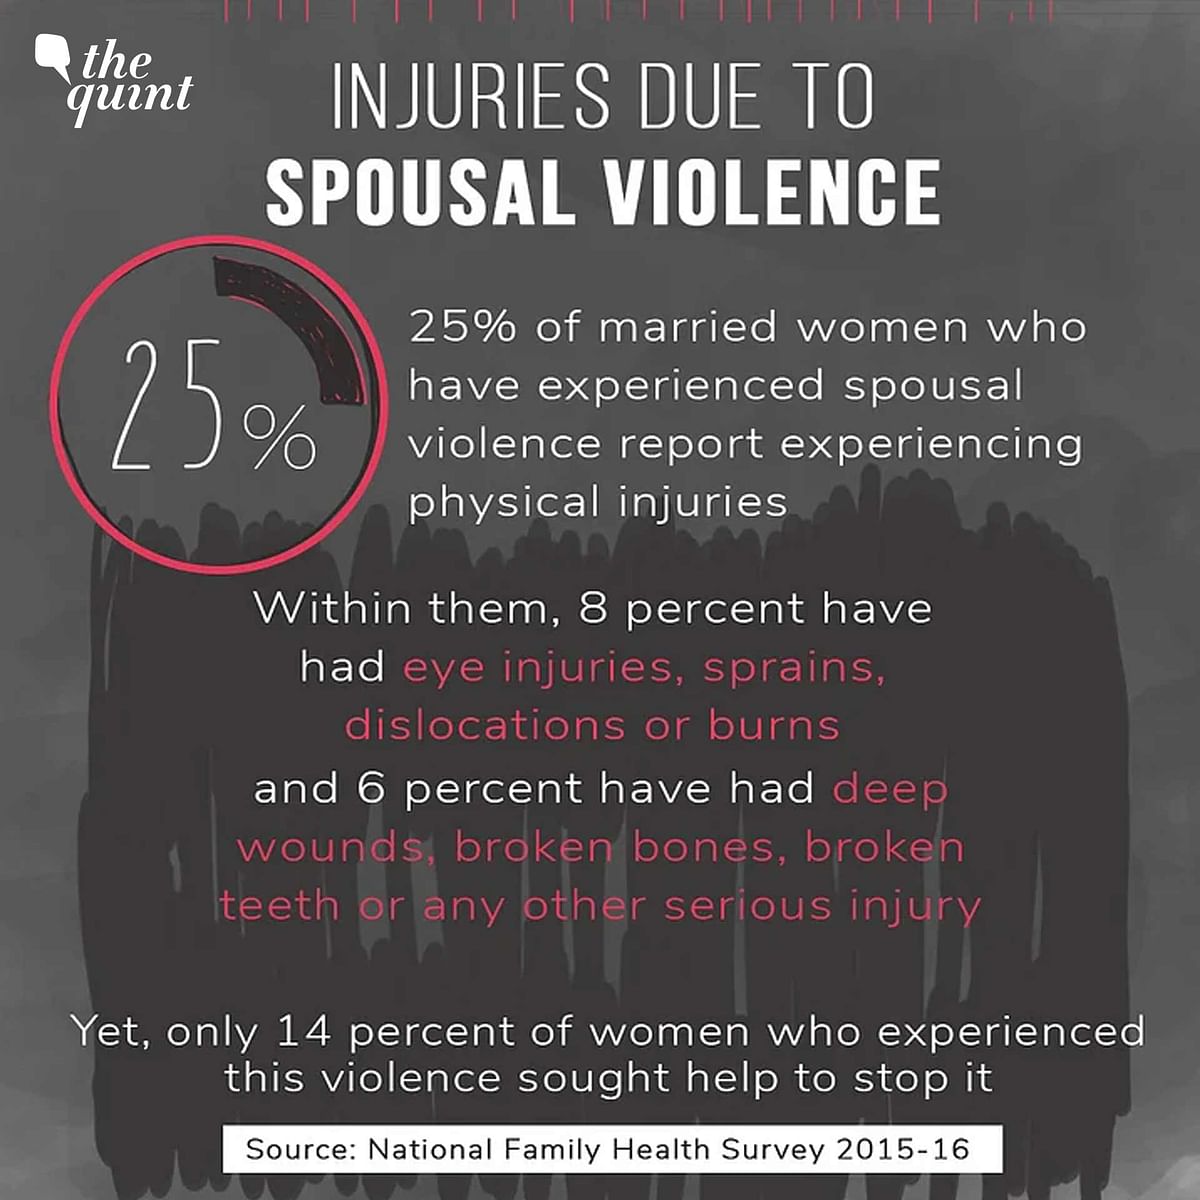 Only 14 percent of women who have experienced domestic violence by anyone have sought help to stop it.